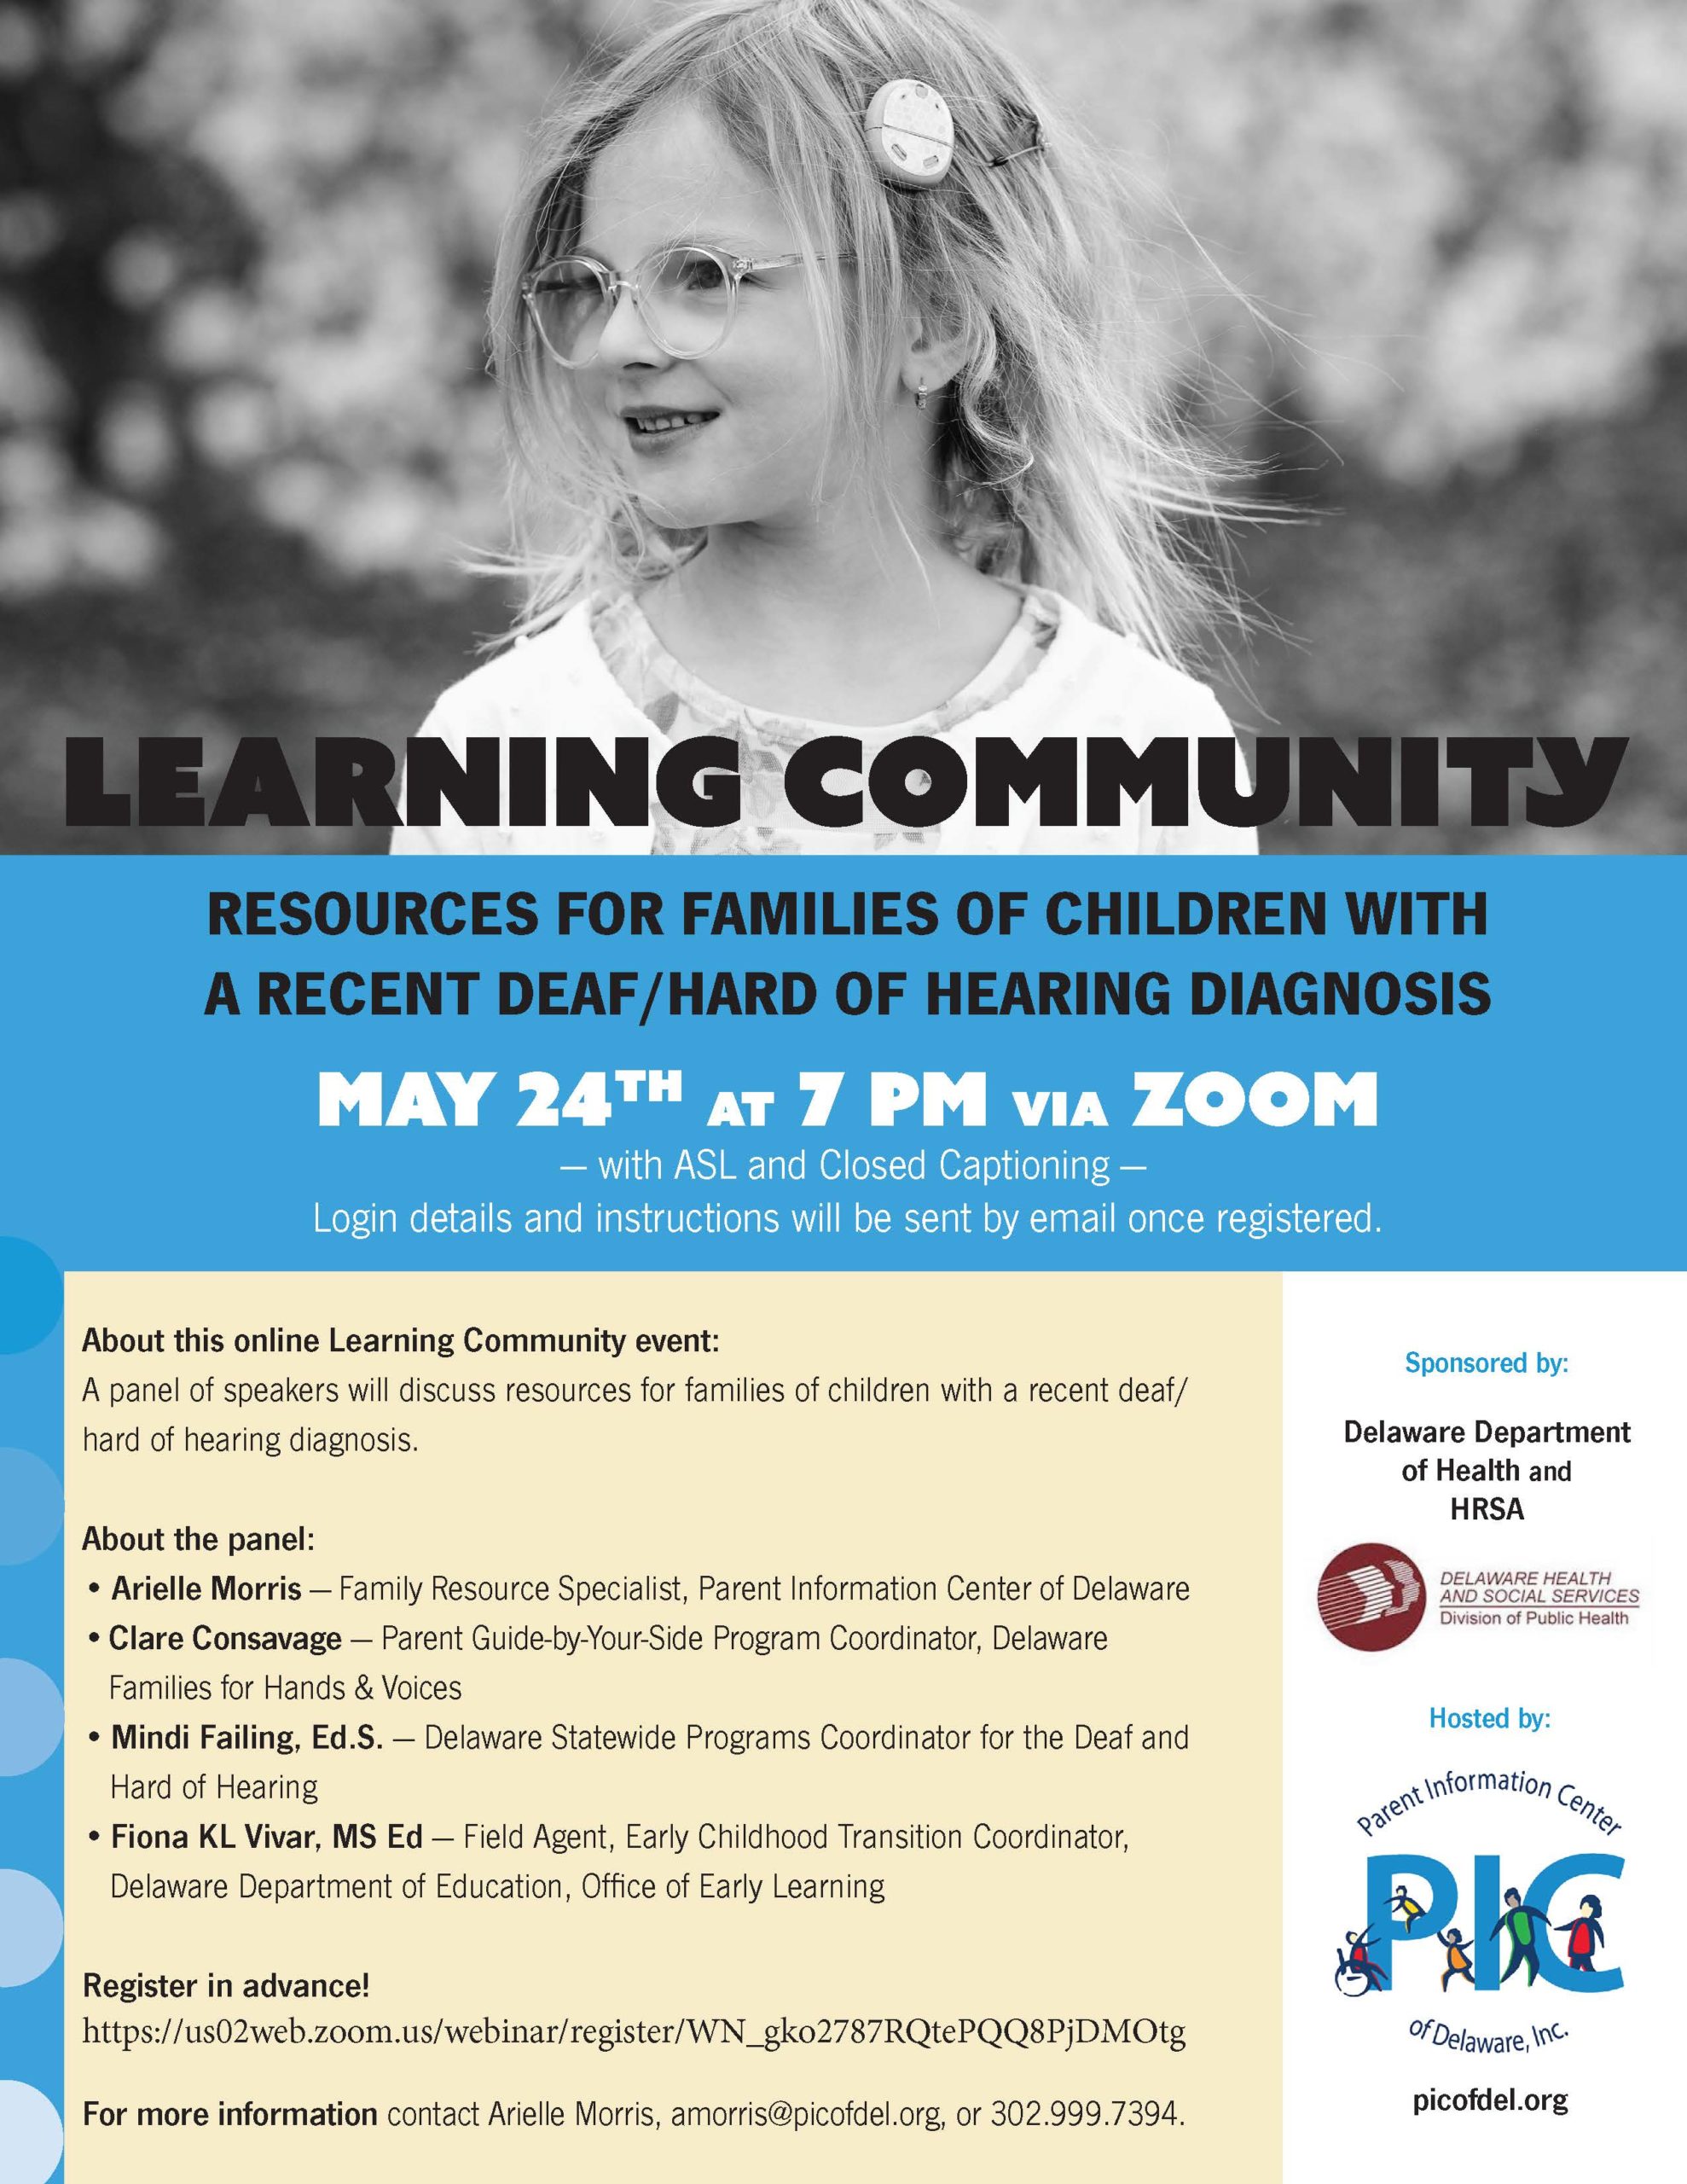 Learning Community- A panel of speakers will discuss resources for families of children with a recent deaf/ hard of hearing diagnosis.